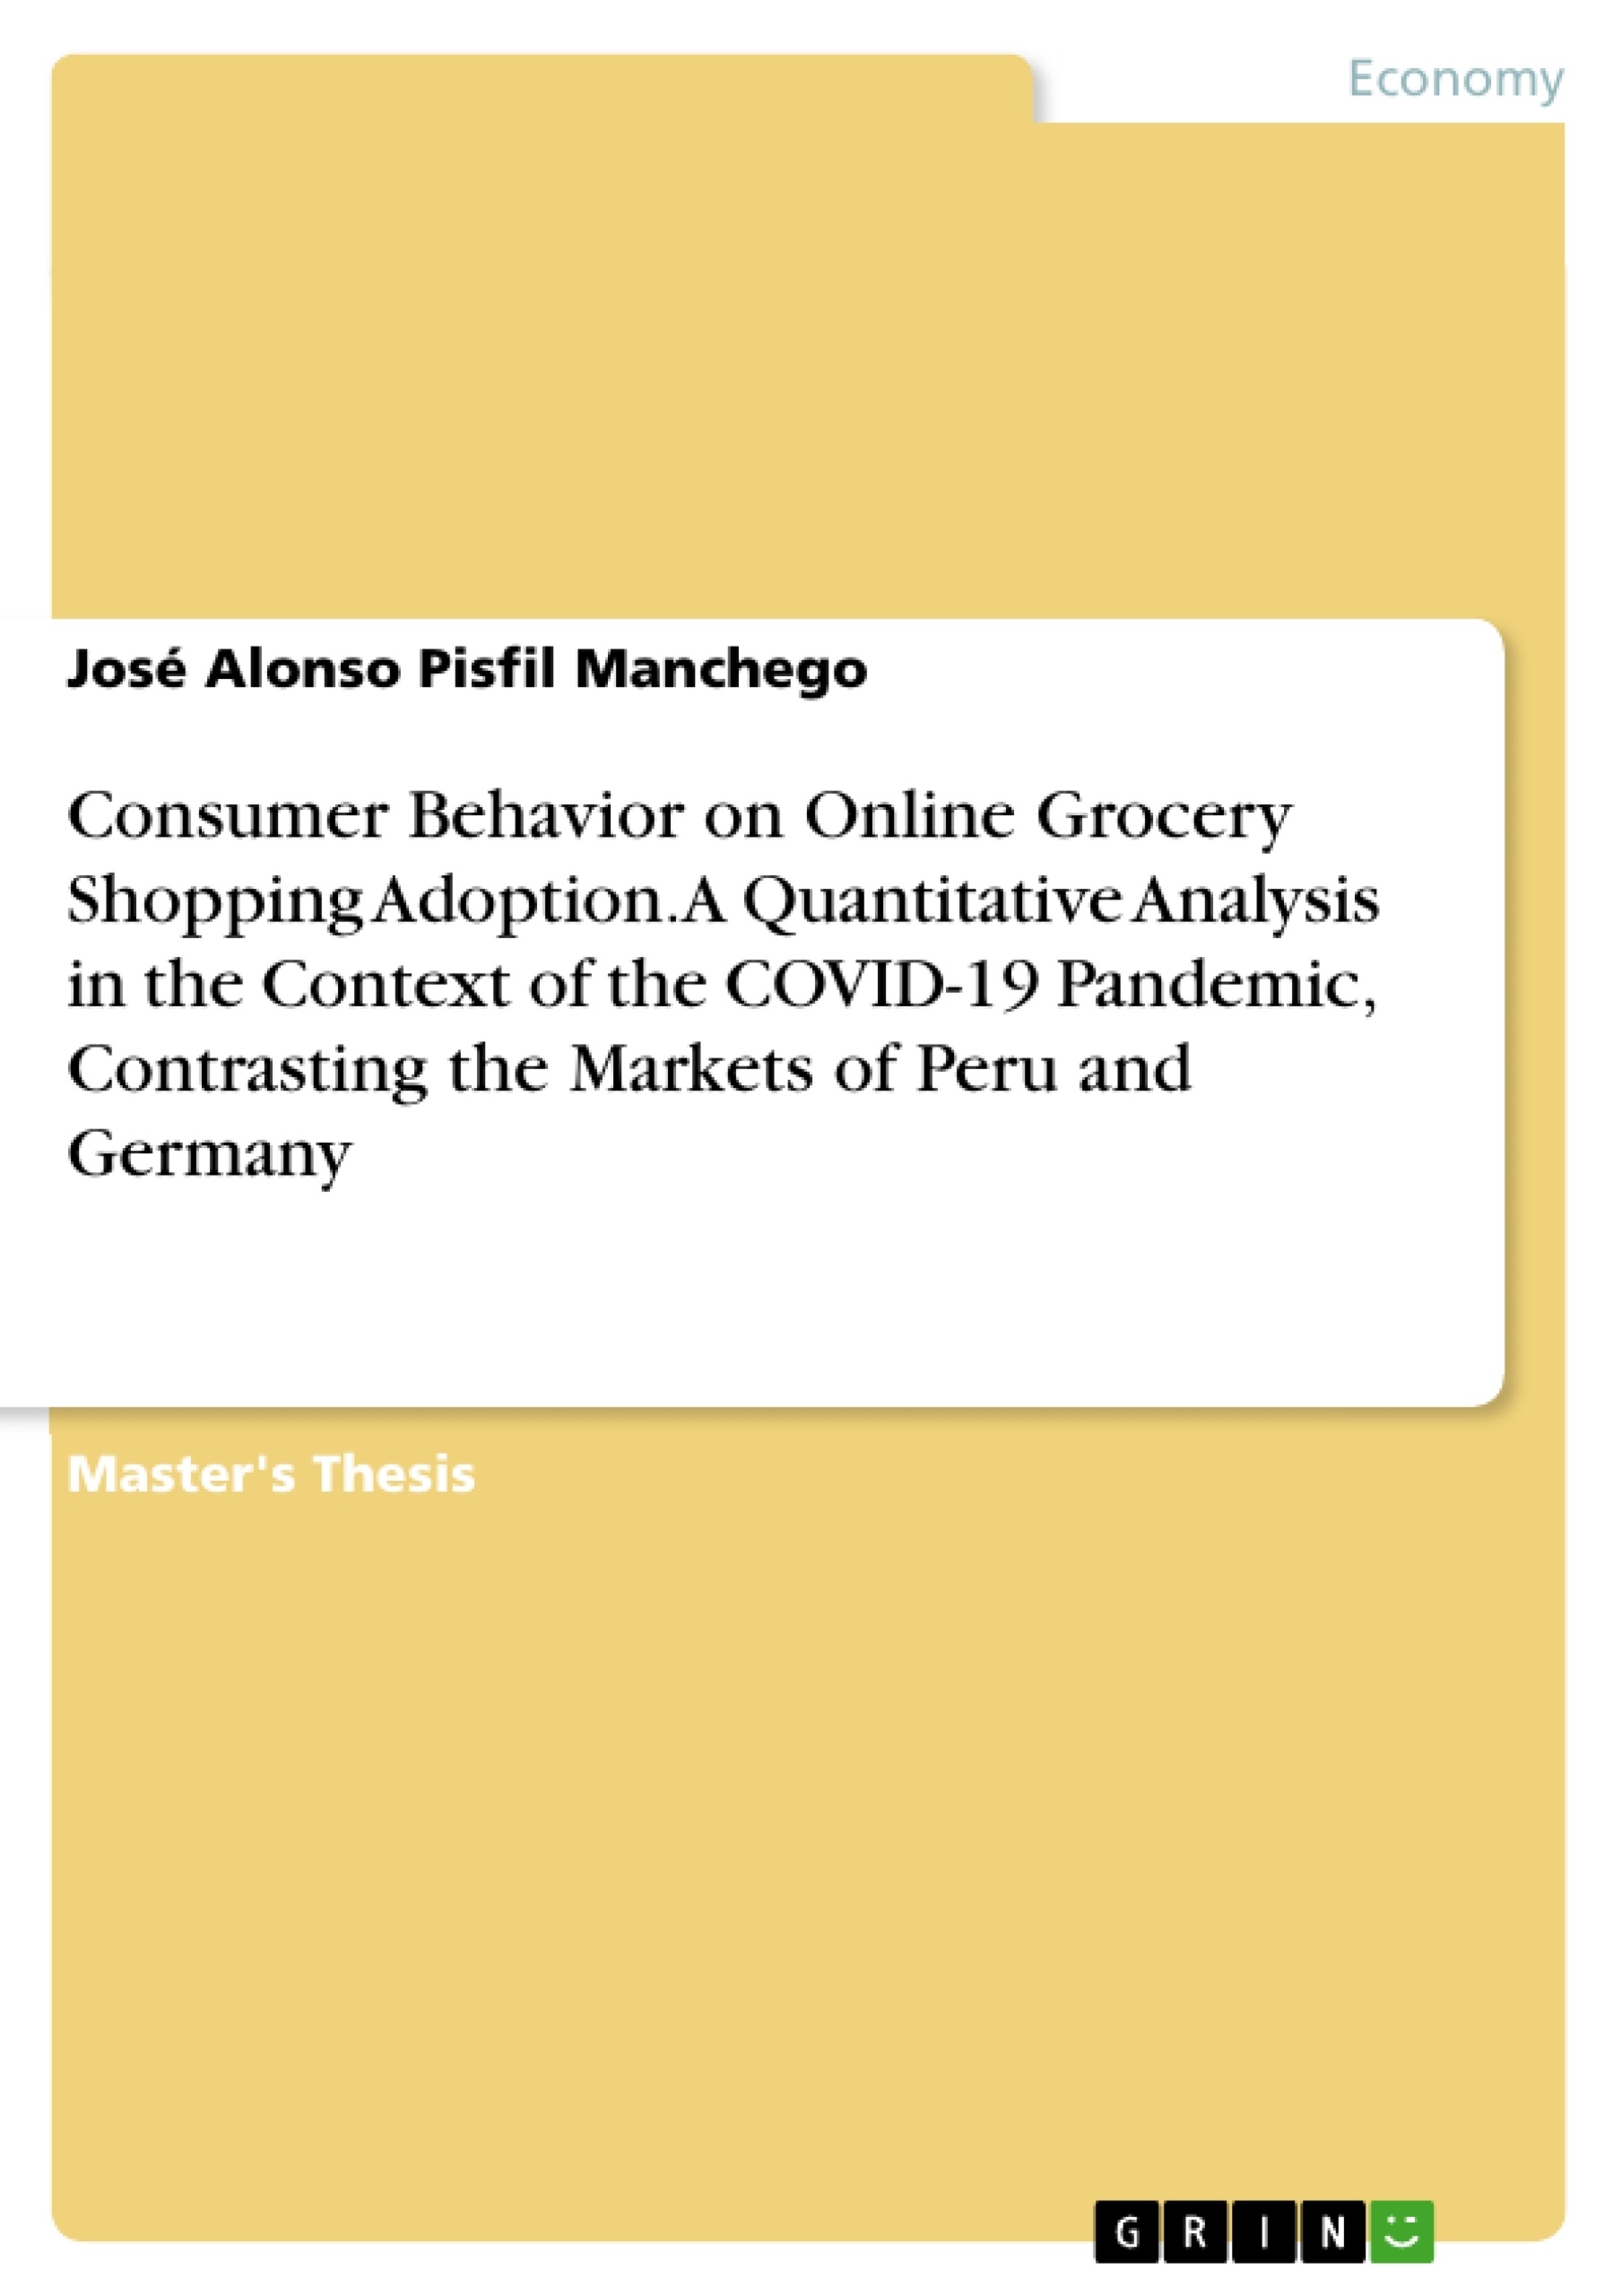 Title: Consumer Behavior on Online Grocery Shopping Adoption. A Quantitative Analysis in the Context of the COVID-19 Pandemic, Contrasting the Markets of Peru and Germany